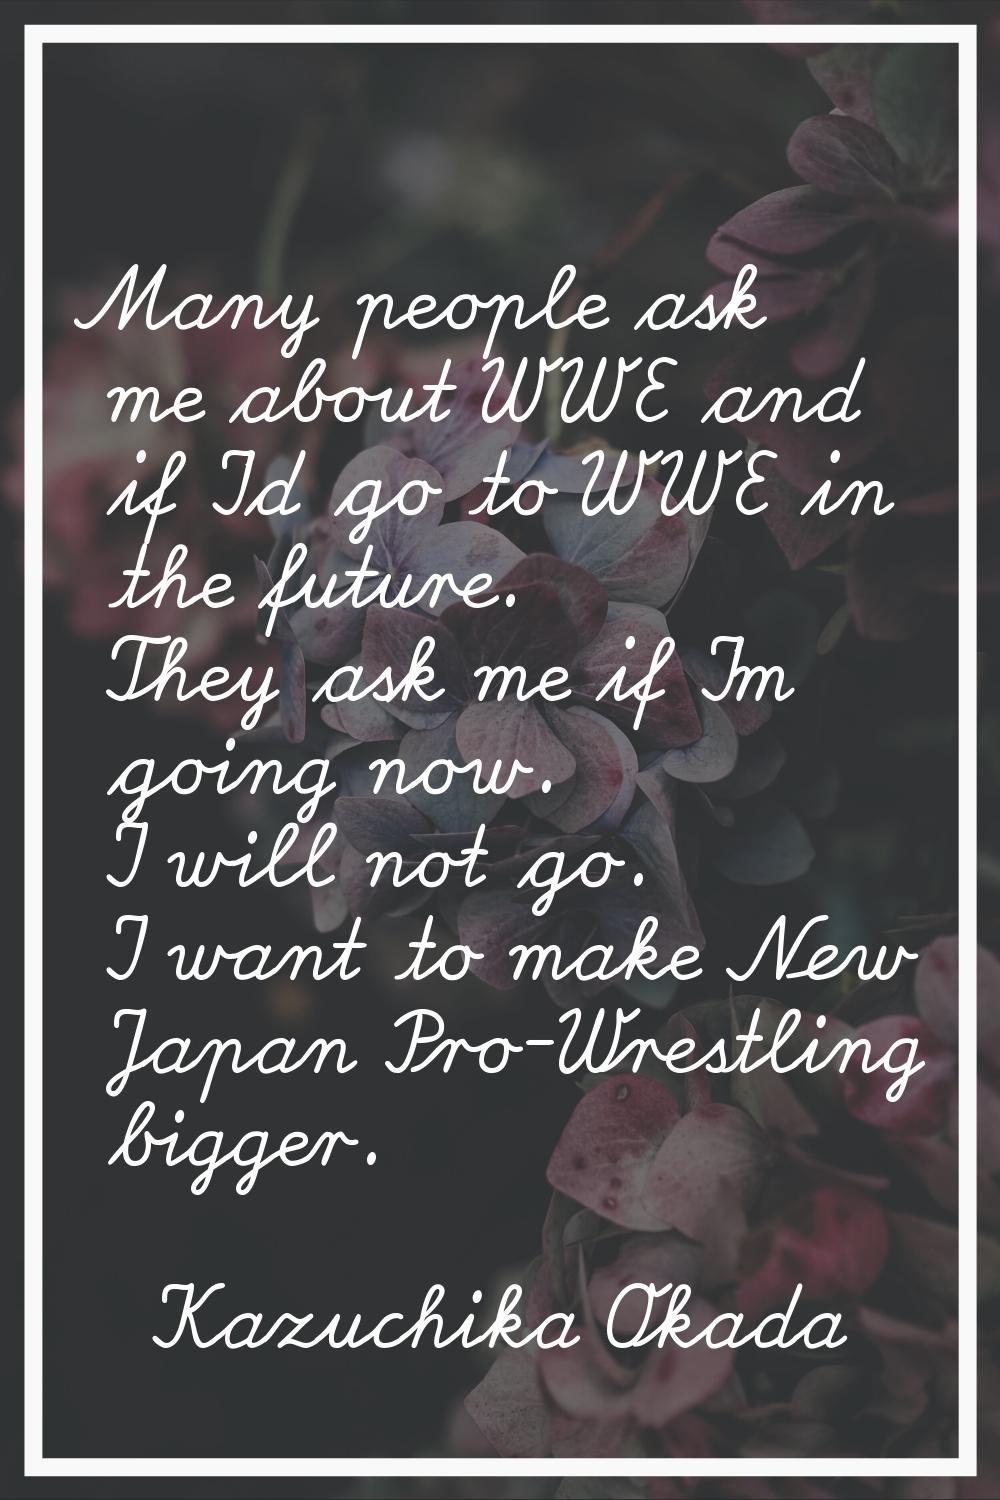 Many people ask me about WWE and if I'd go to WWE in the future. They ask me if I'm going now. I wi